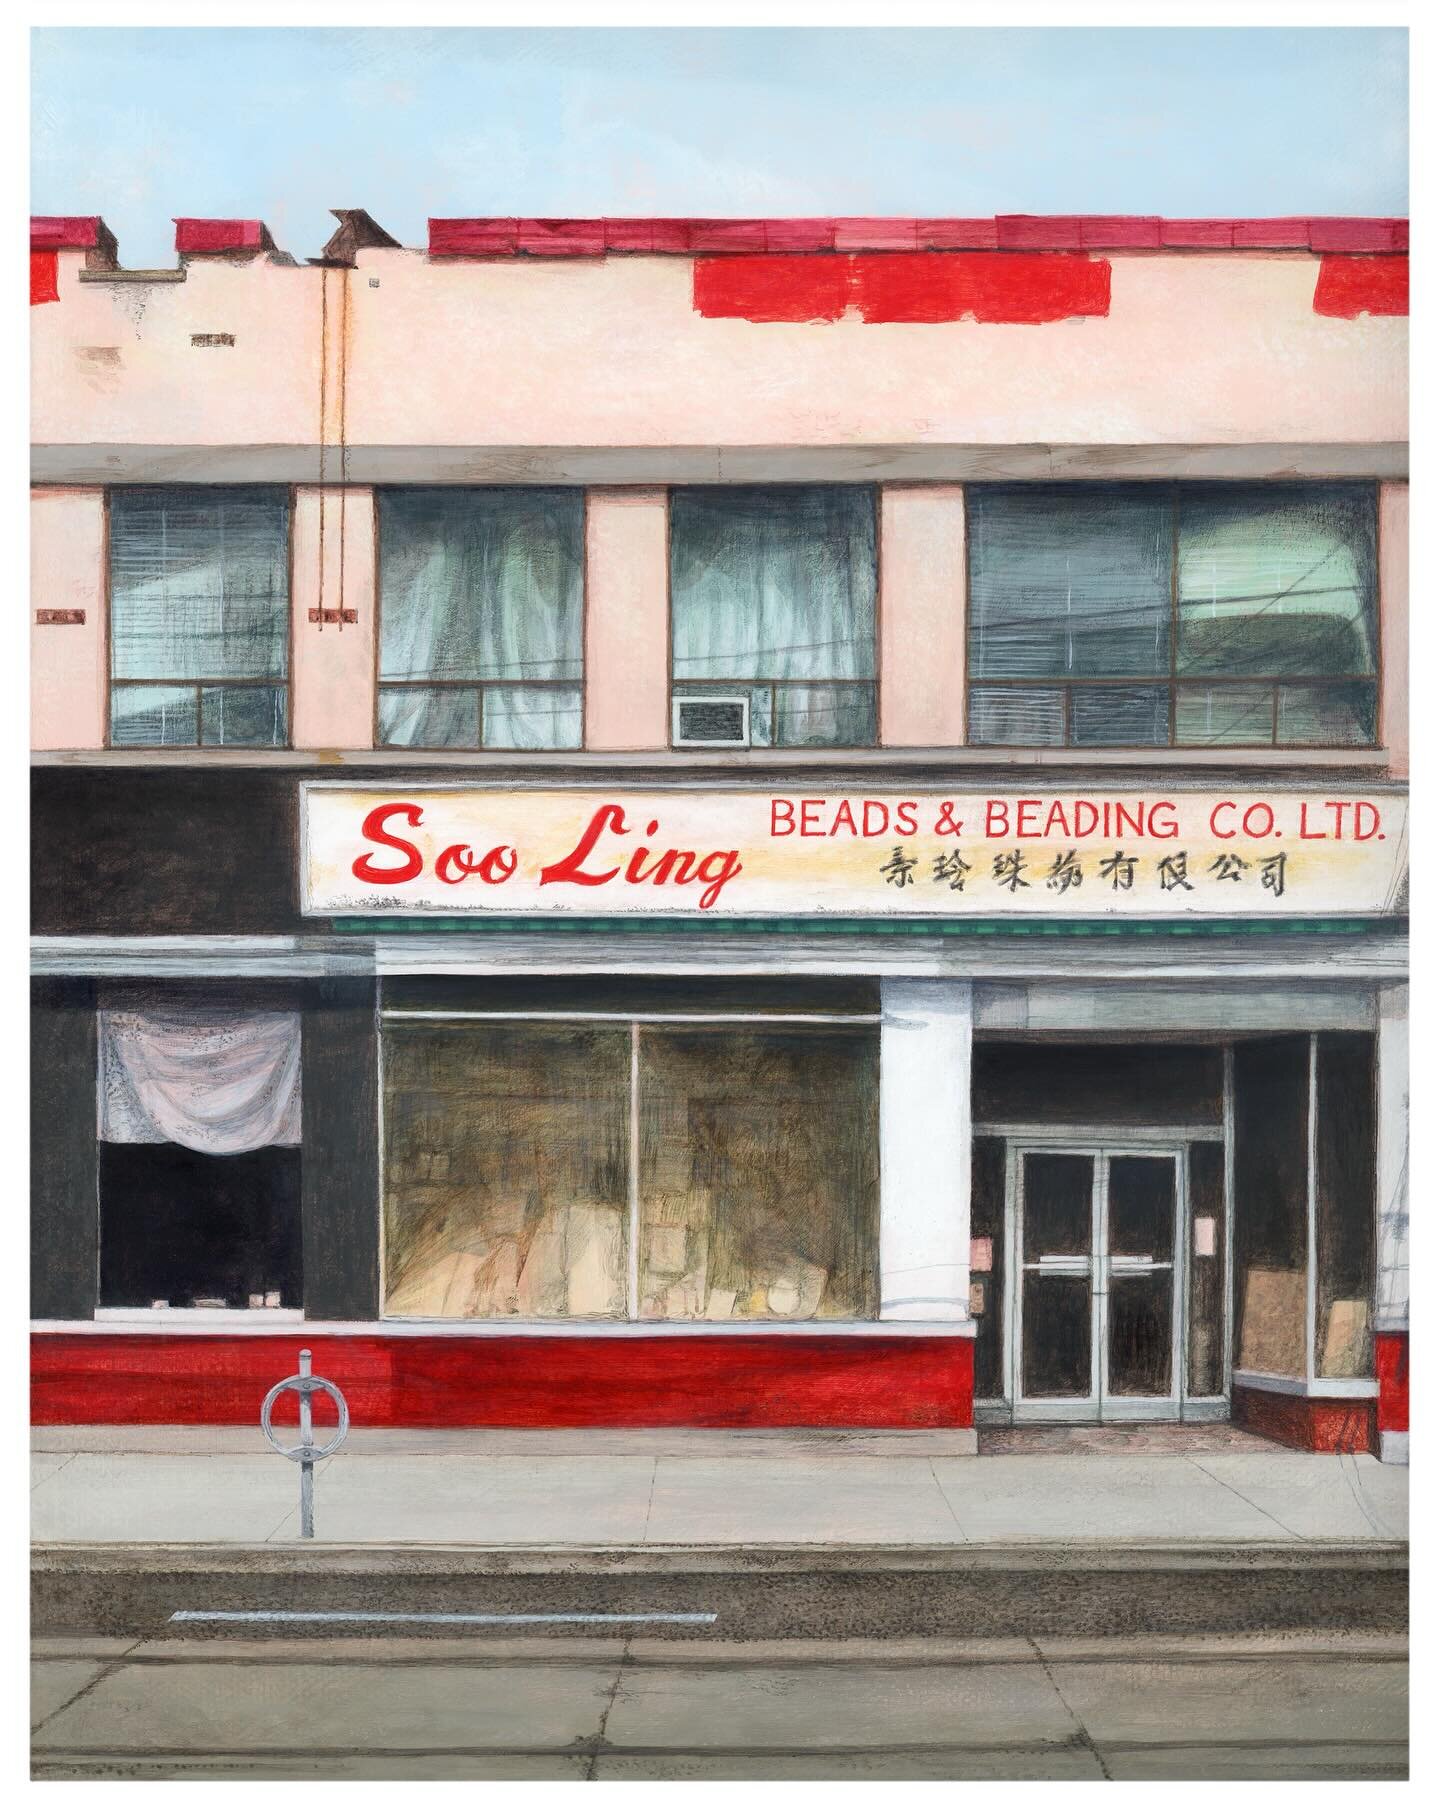 Hey!..join me and @joecobden this Sunday, Dec 17, to celebrate, appreciate and scratch our heads over Toronto store fronts and their signage. Joe made a beautiful book and I&rsquo;ll be showing a few paintings and have some prints available&hellip; D